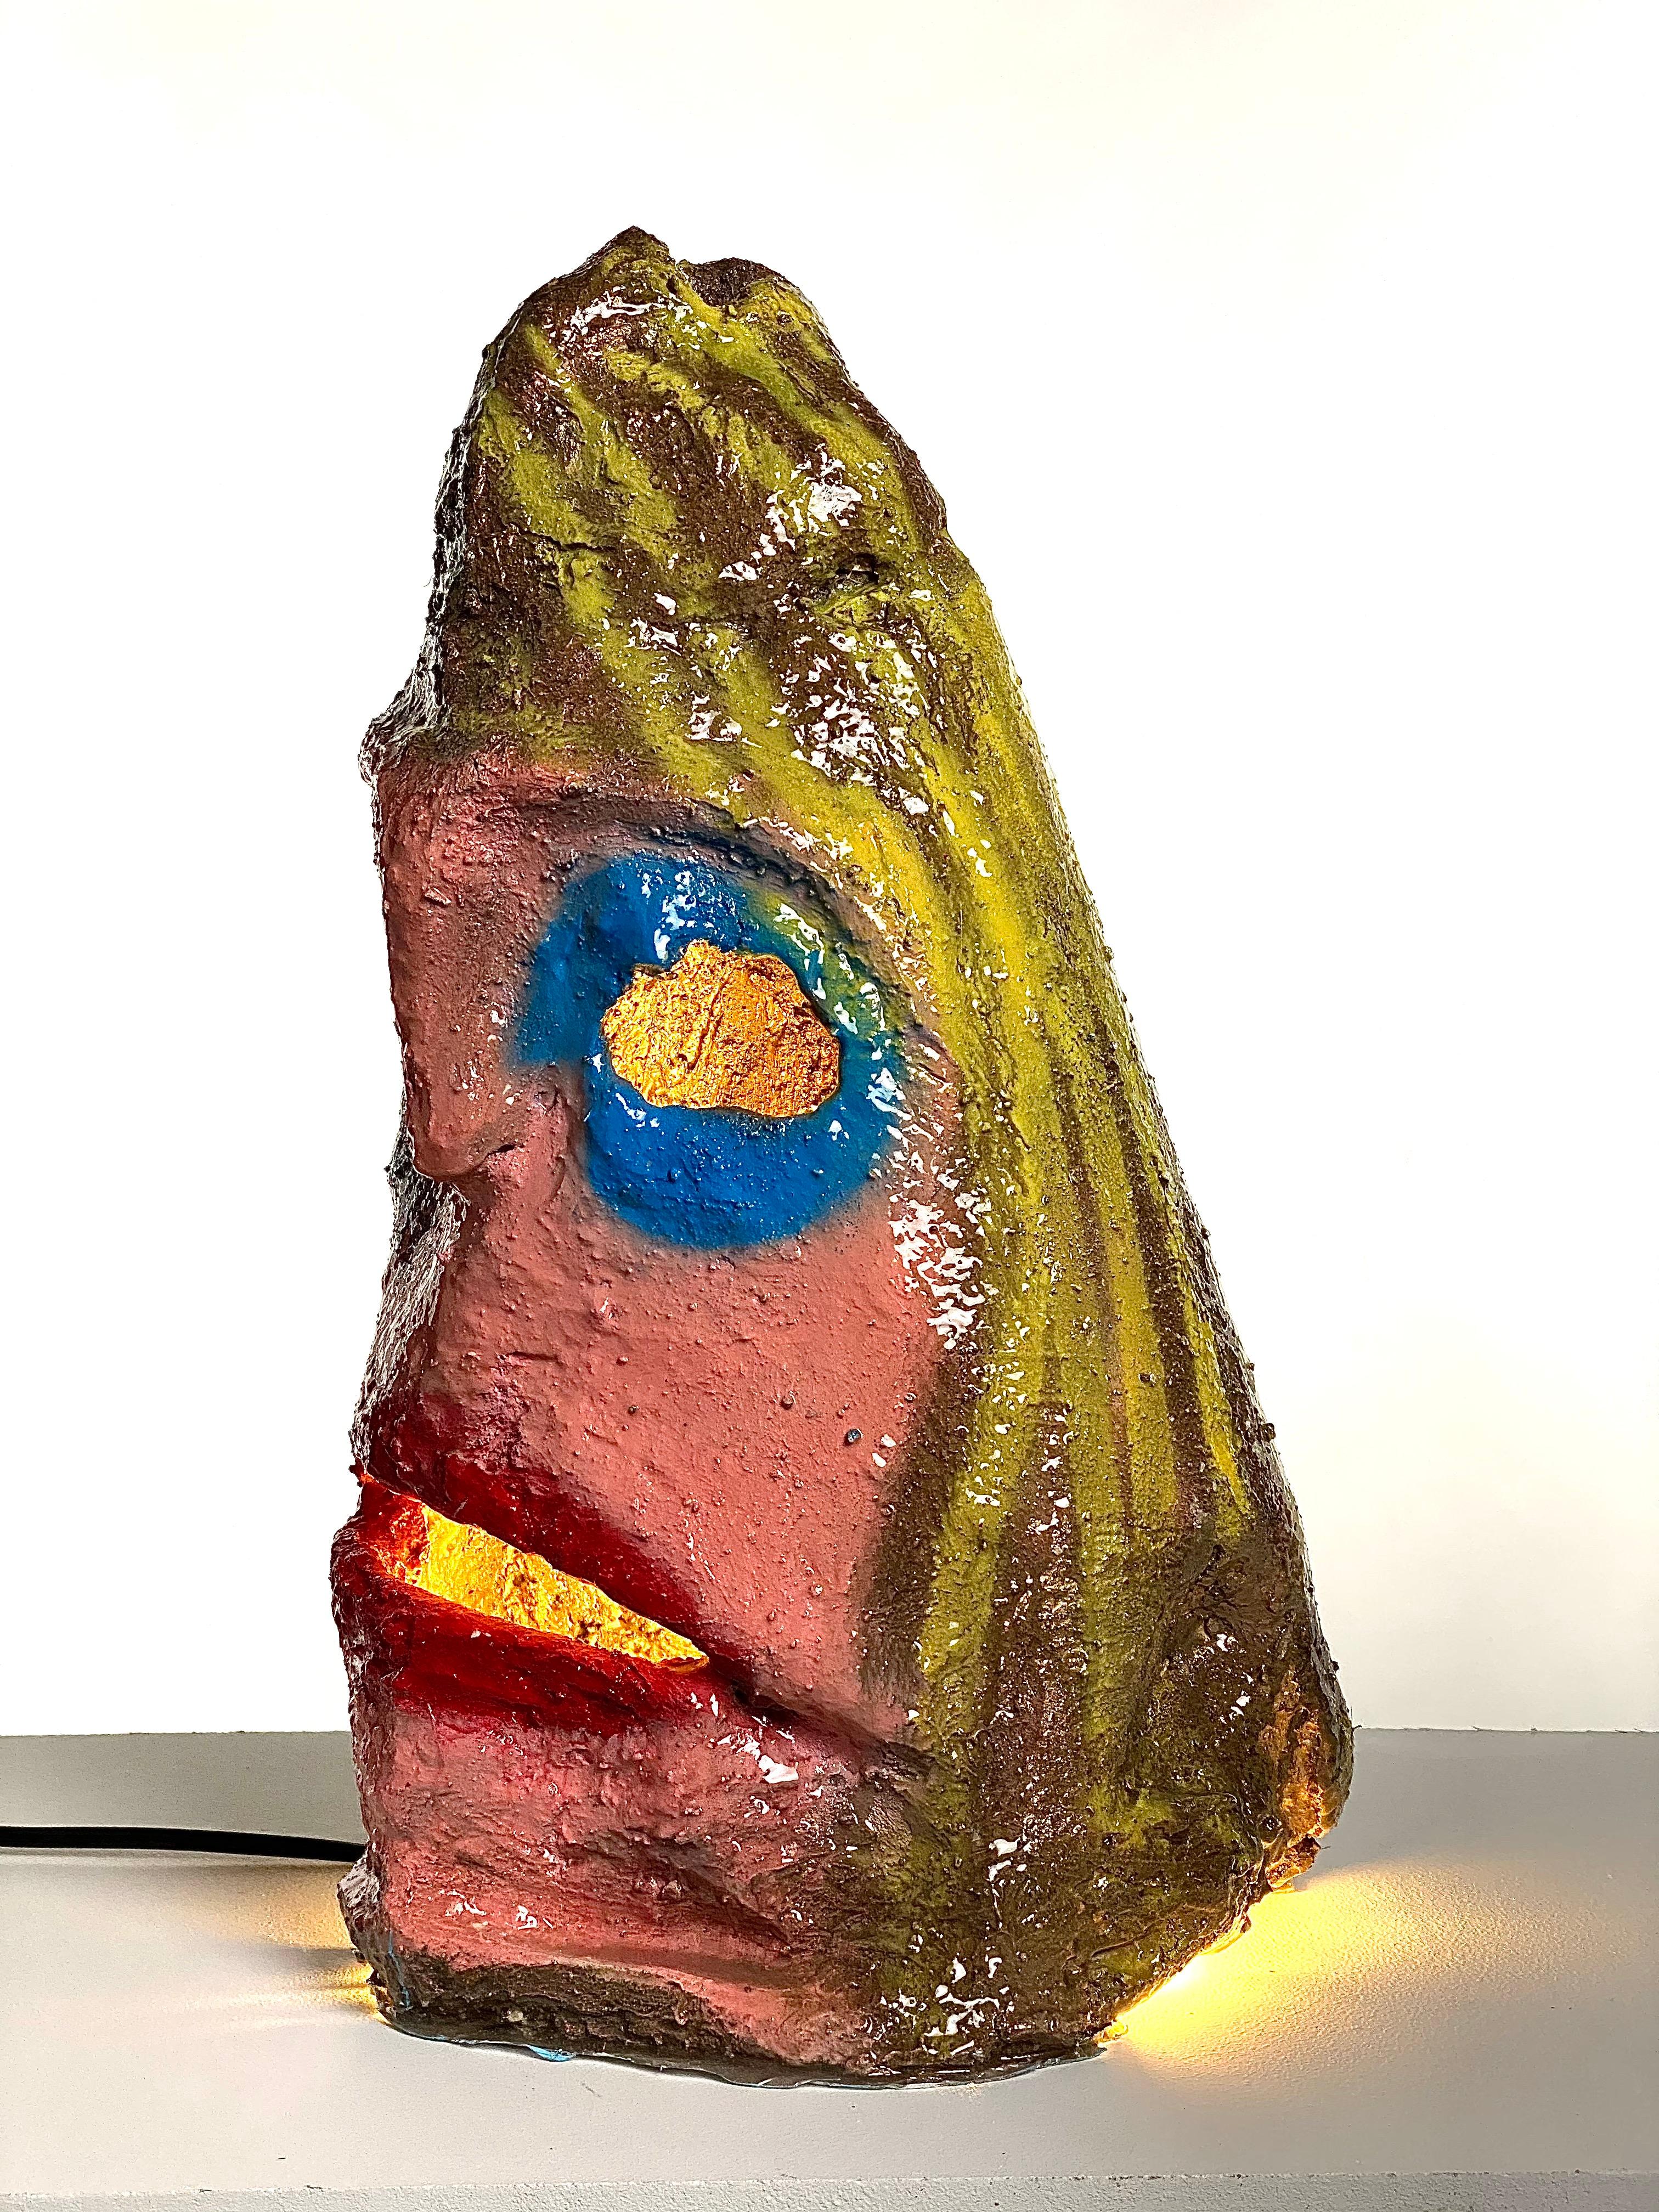 Multicolor Face Sculptural Plaster Table Lamp, 21st Century by Mattia Biagi In New Condition For Sale In Culver City, CA